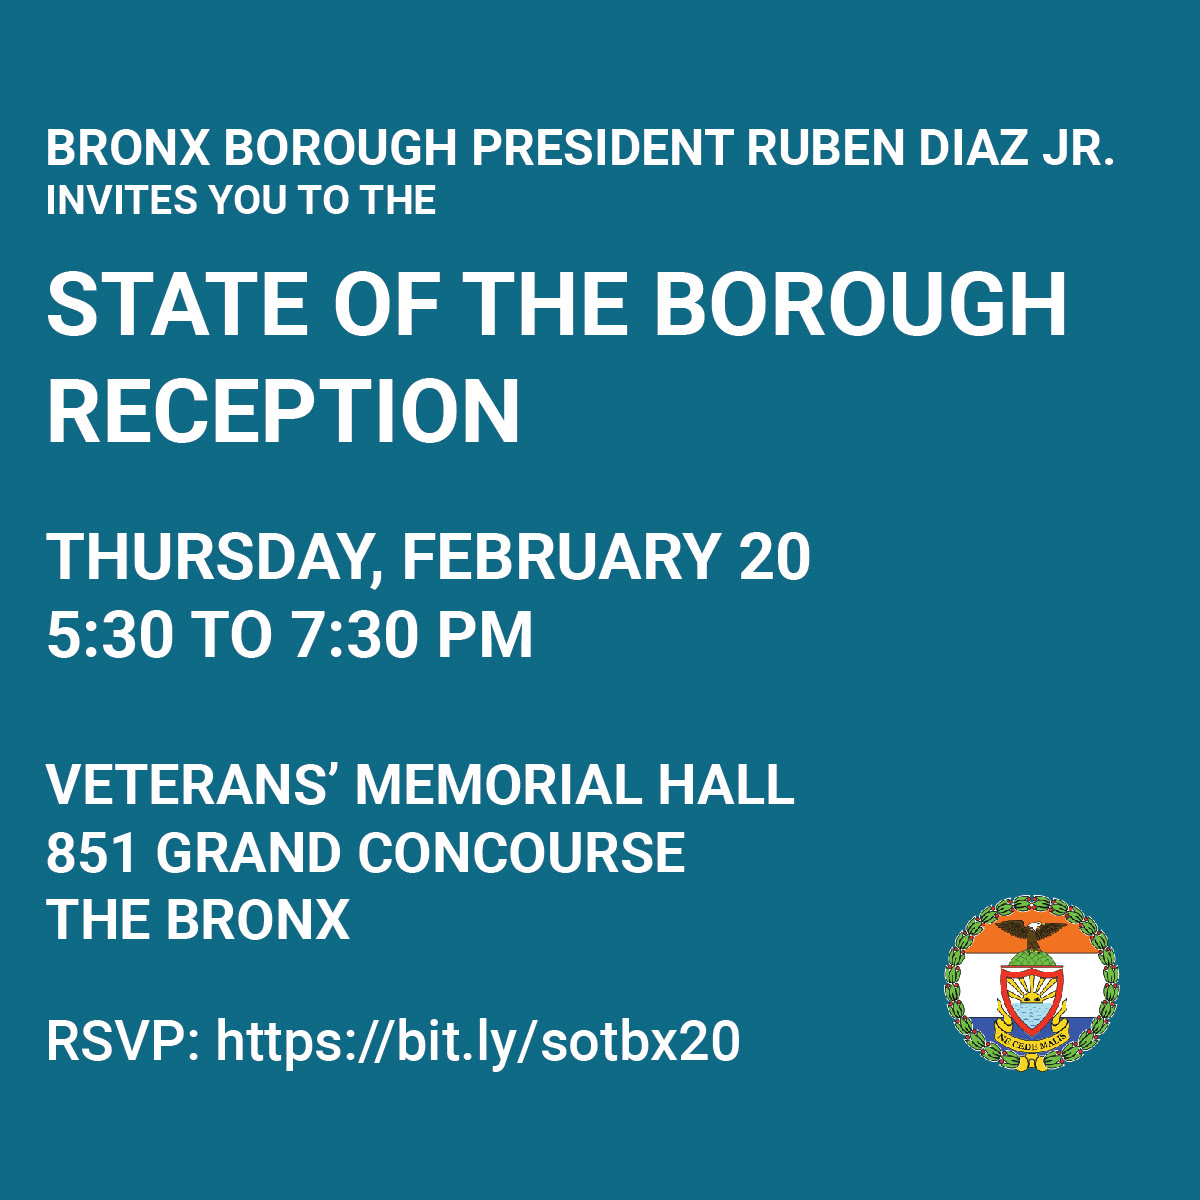 You're invited to the State of the Borough Reception on February 20, 2020, at 851 Grand Concourse at 5:30 PM. RSVP at bit.ly/sotbx20